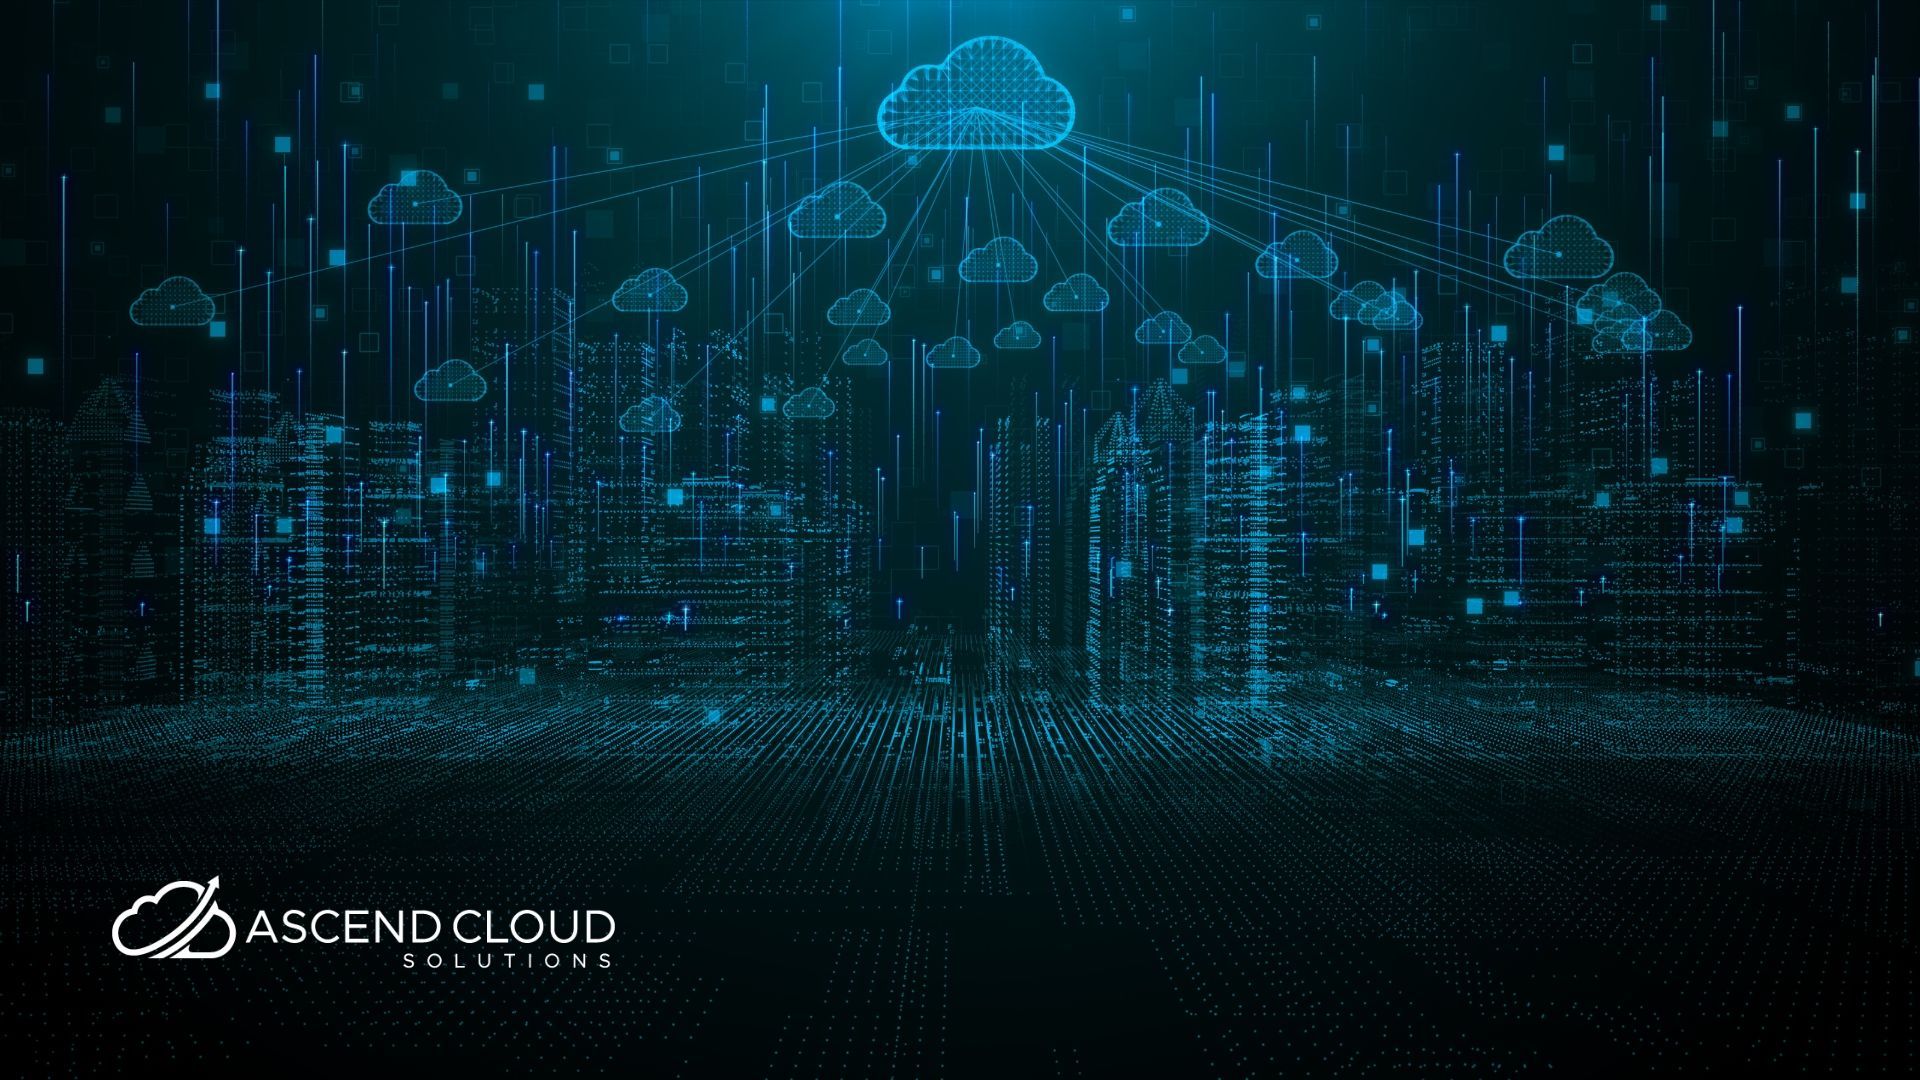 For SMEs, money is a key concern when considering cloud migration. How can you manage costs without sacrificing quality? Learn more in our article.